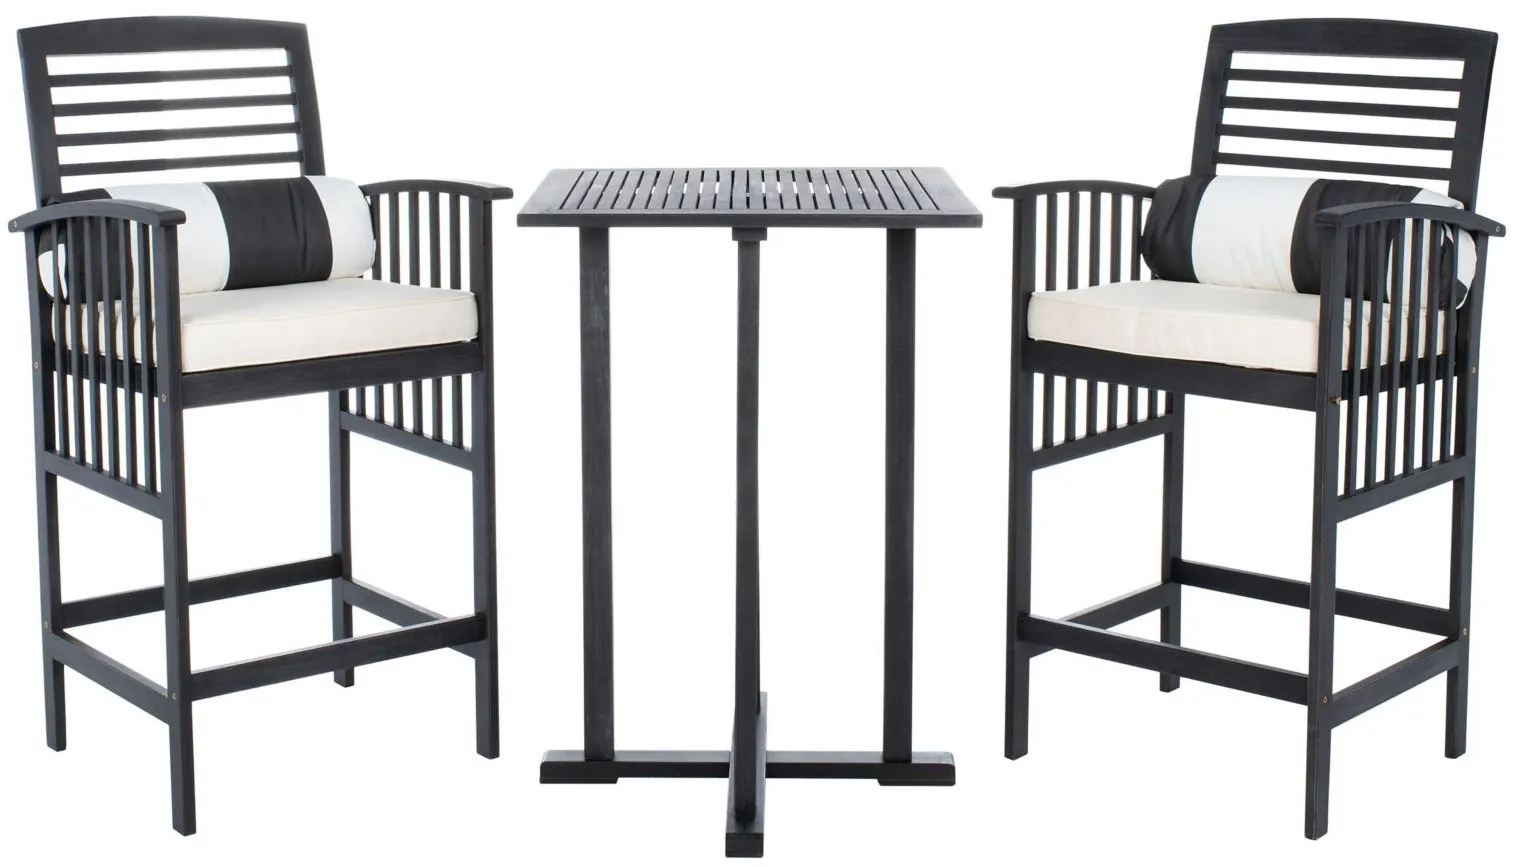 Davies 3-pc... Outdoor Pub Table Set in Pacific Blue by Safavieh